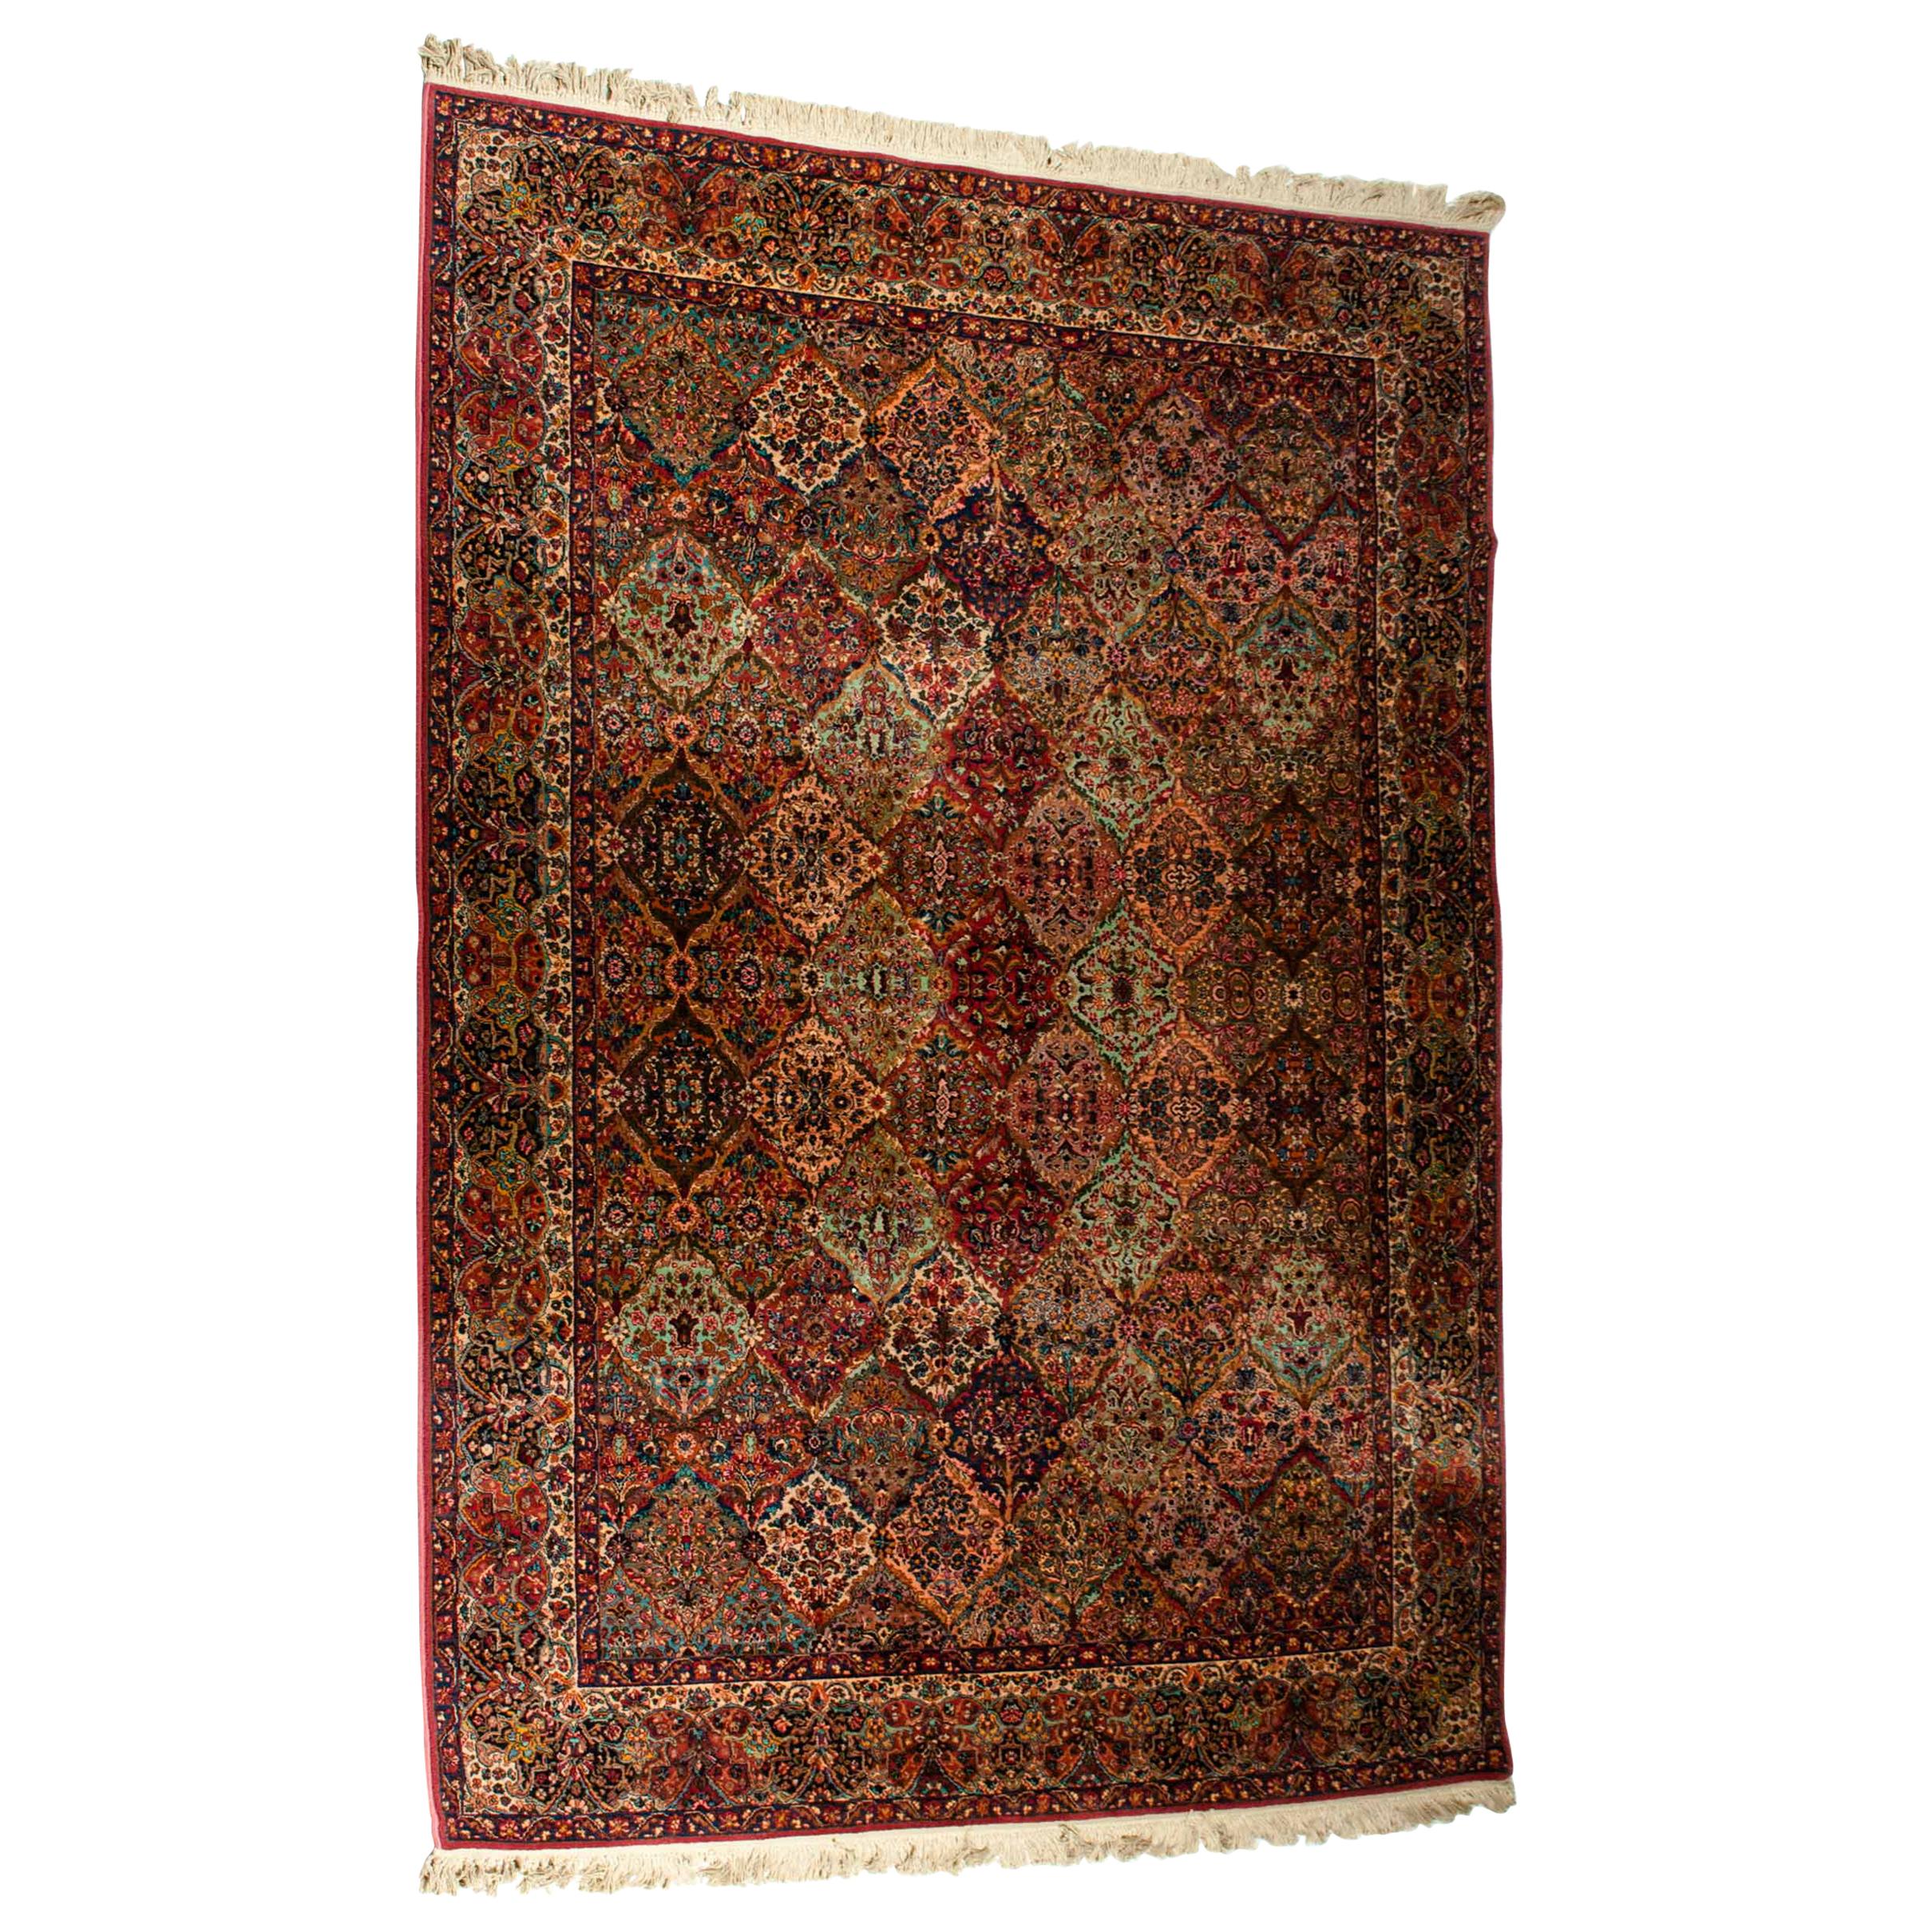 Handmade North American Wool Knotted Rug